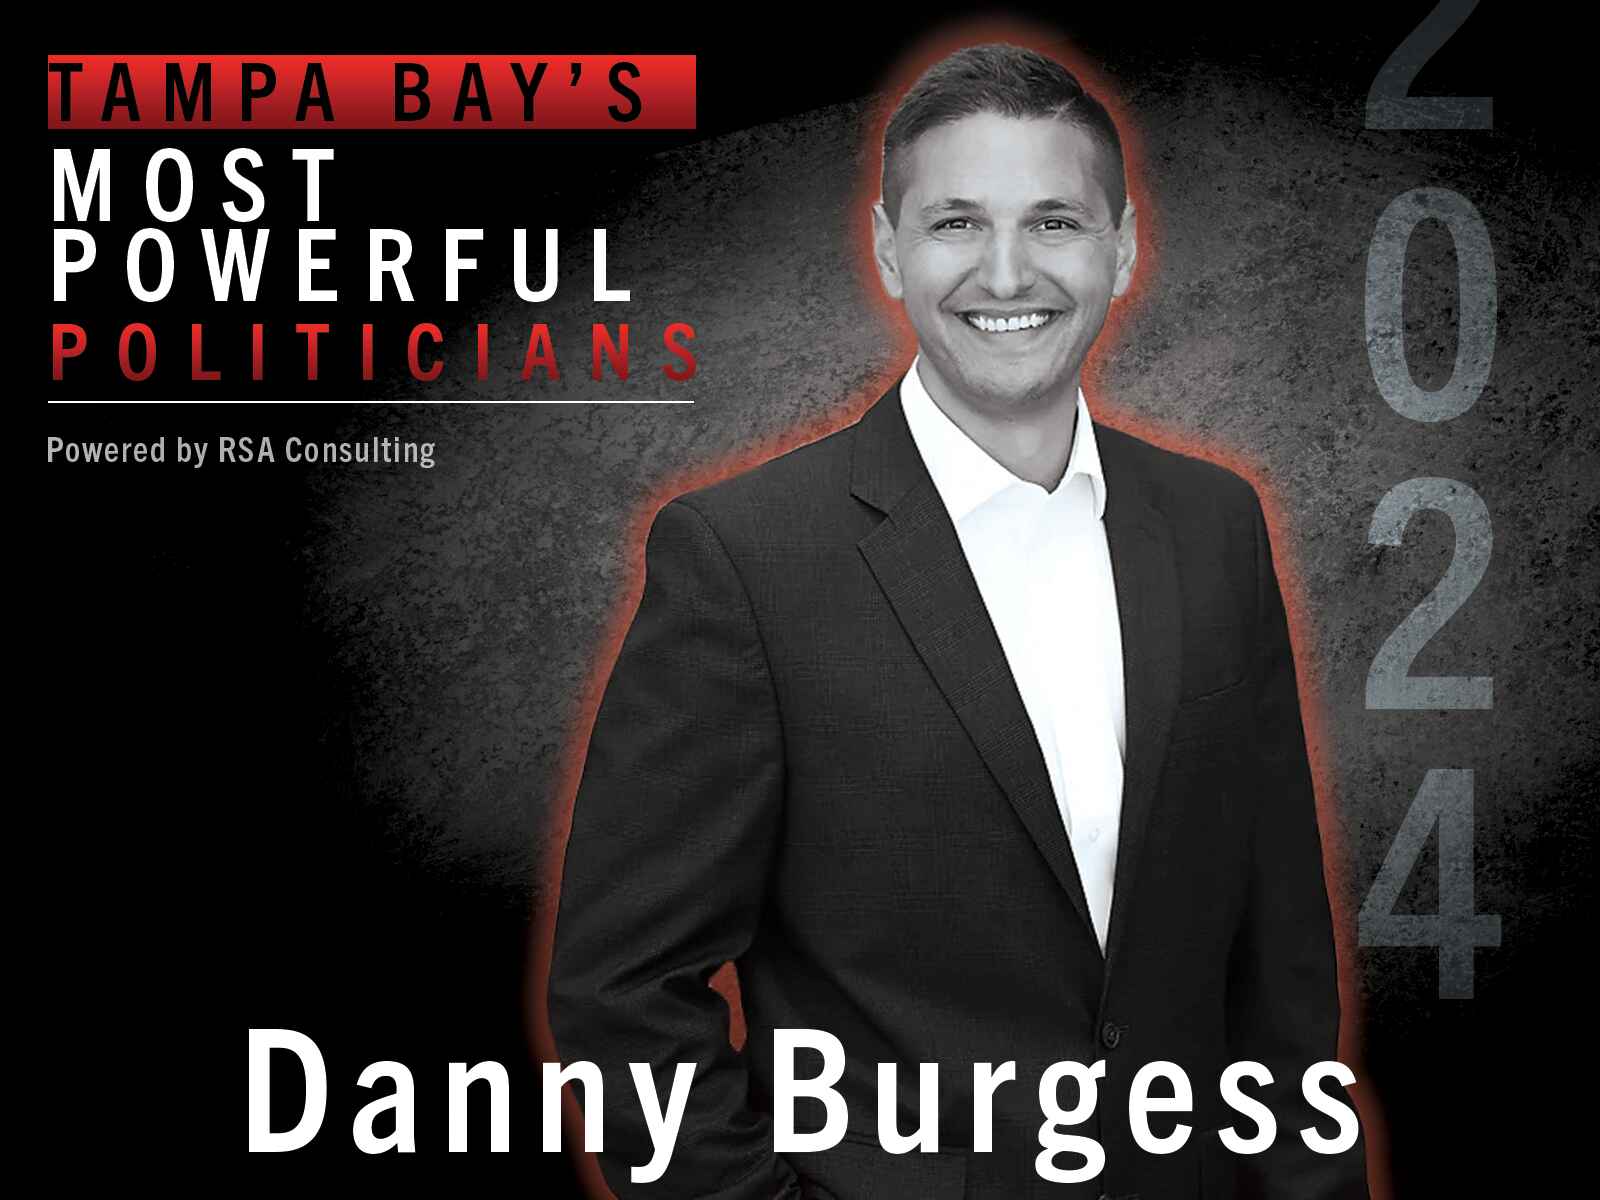  No. 8 on the list of Tampa Bay’s Most Powerful Politicians: Danny Burgess 